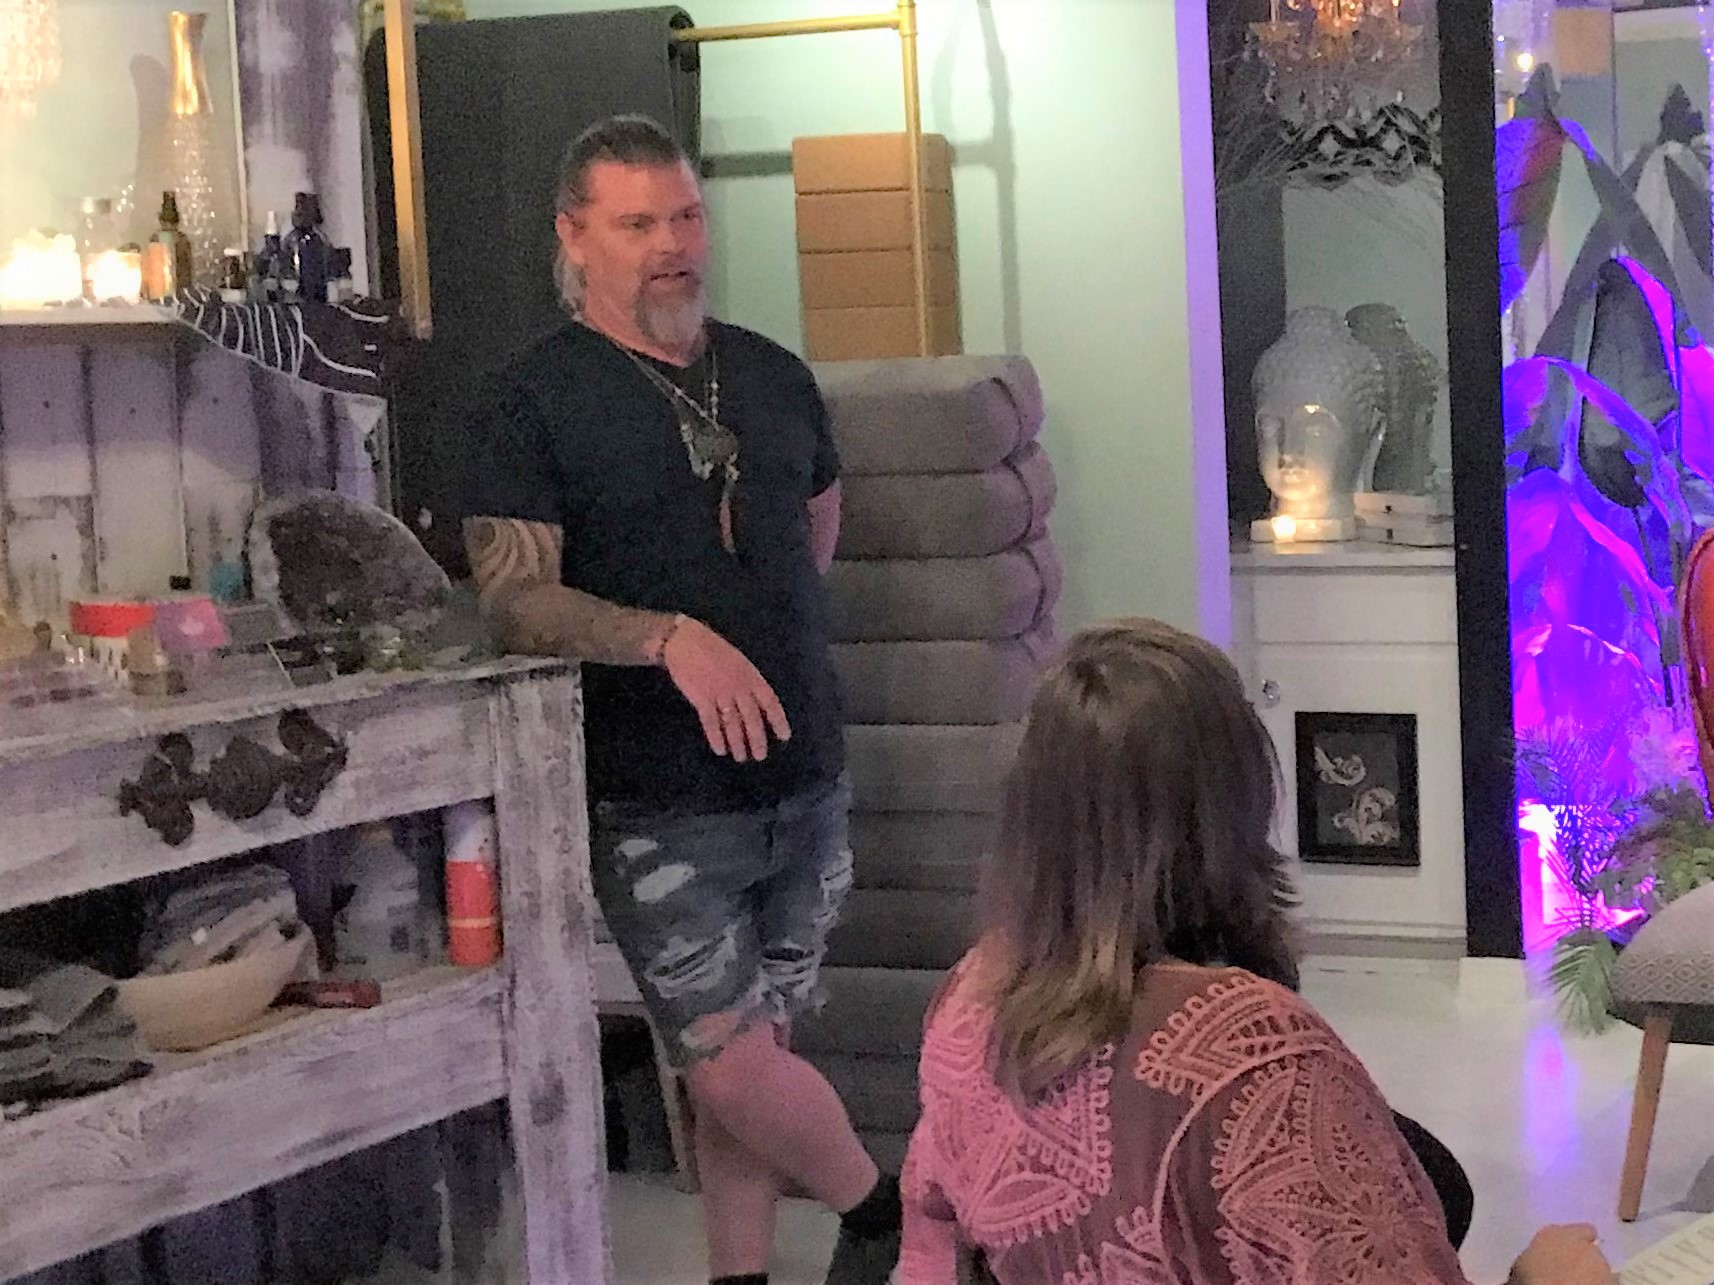 Russell shares his metaphysical story with the community in his yoga studio.